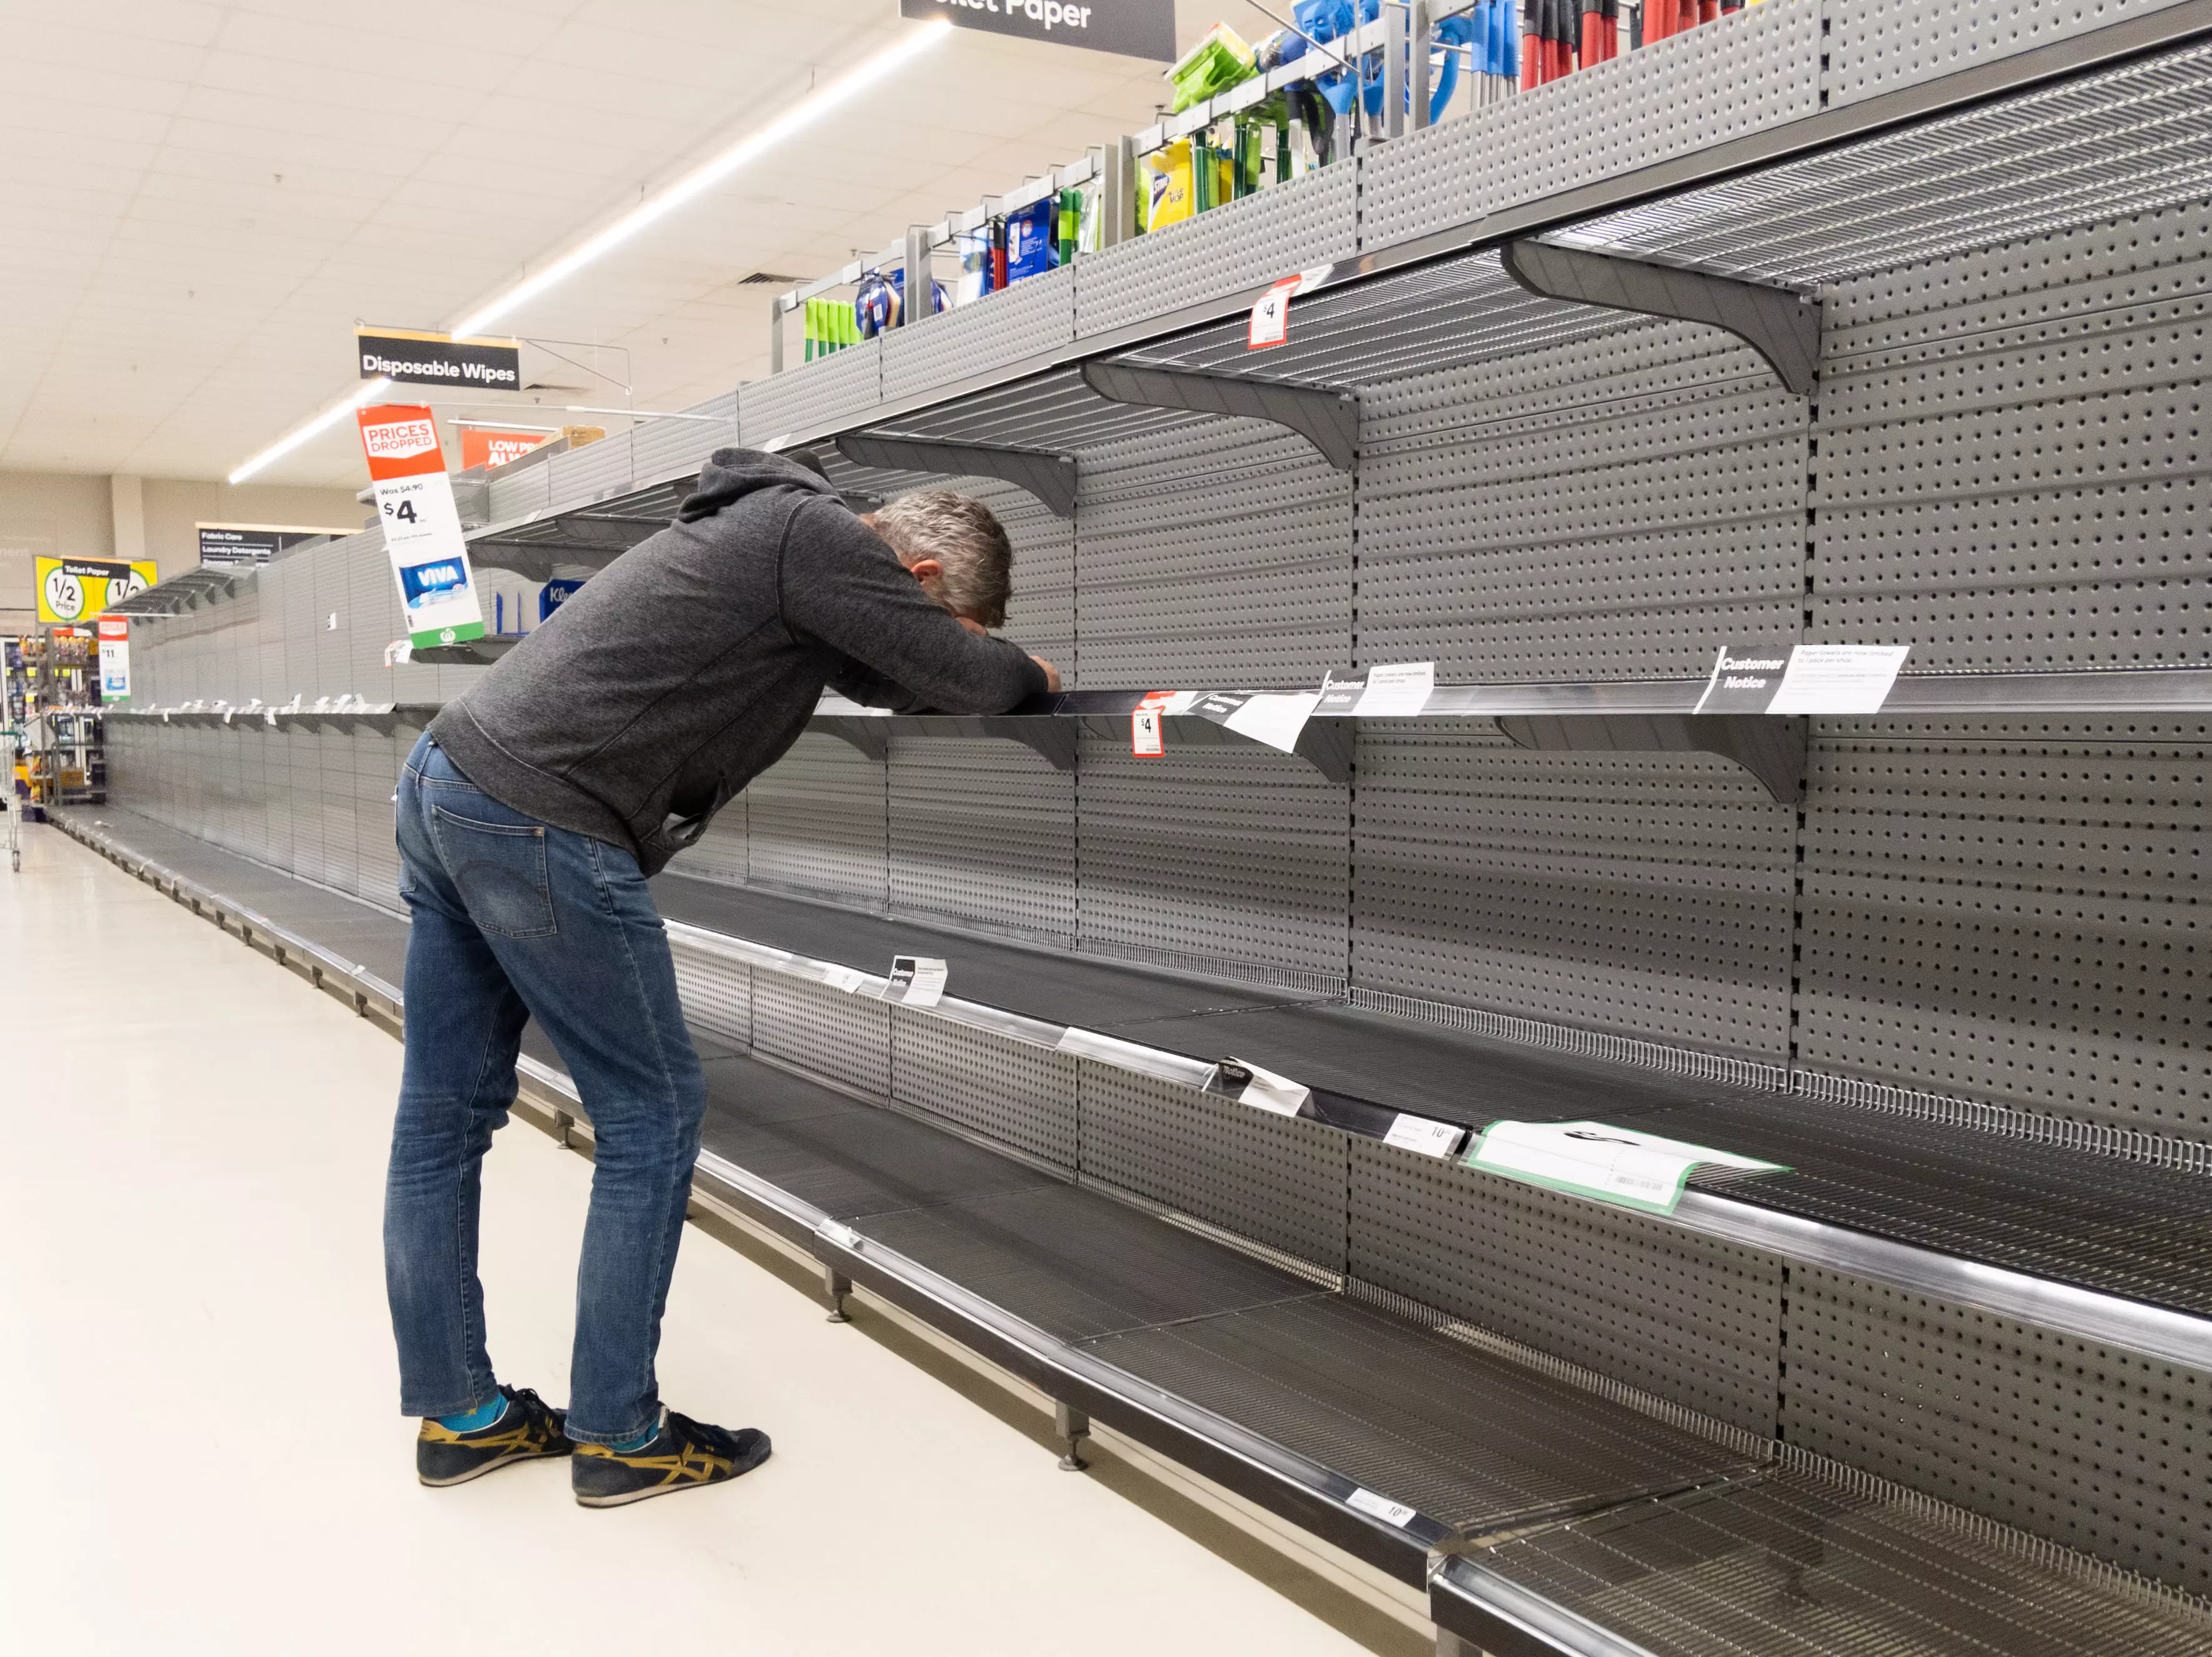 Shelves were wiped clear during the height of panic buying in March.